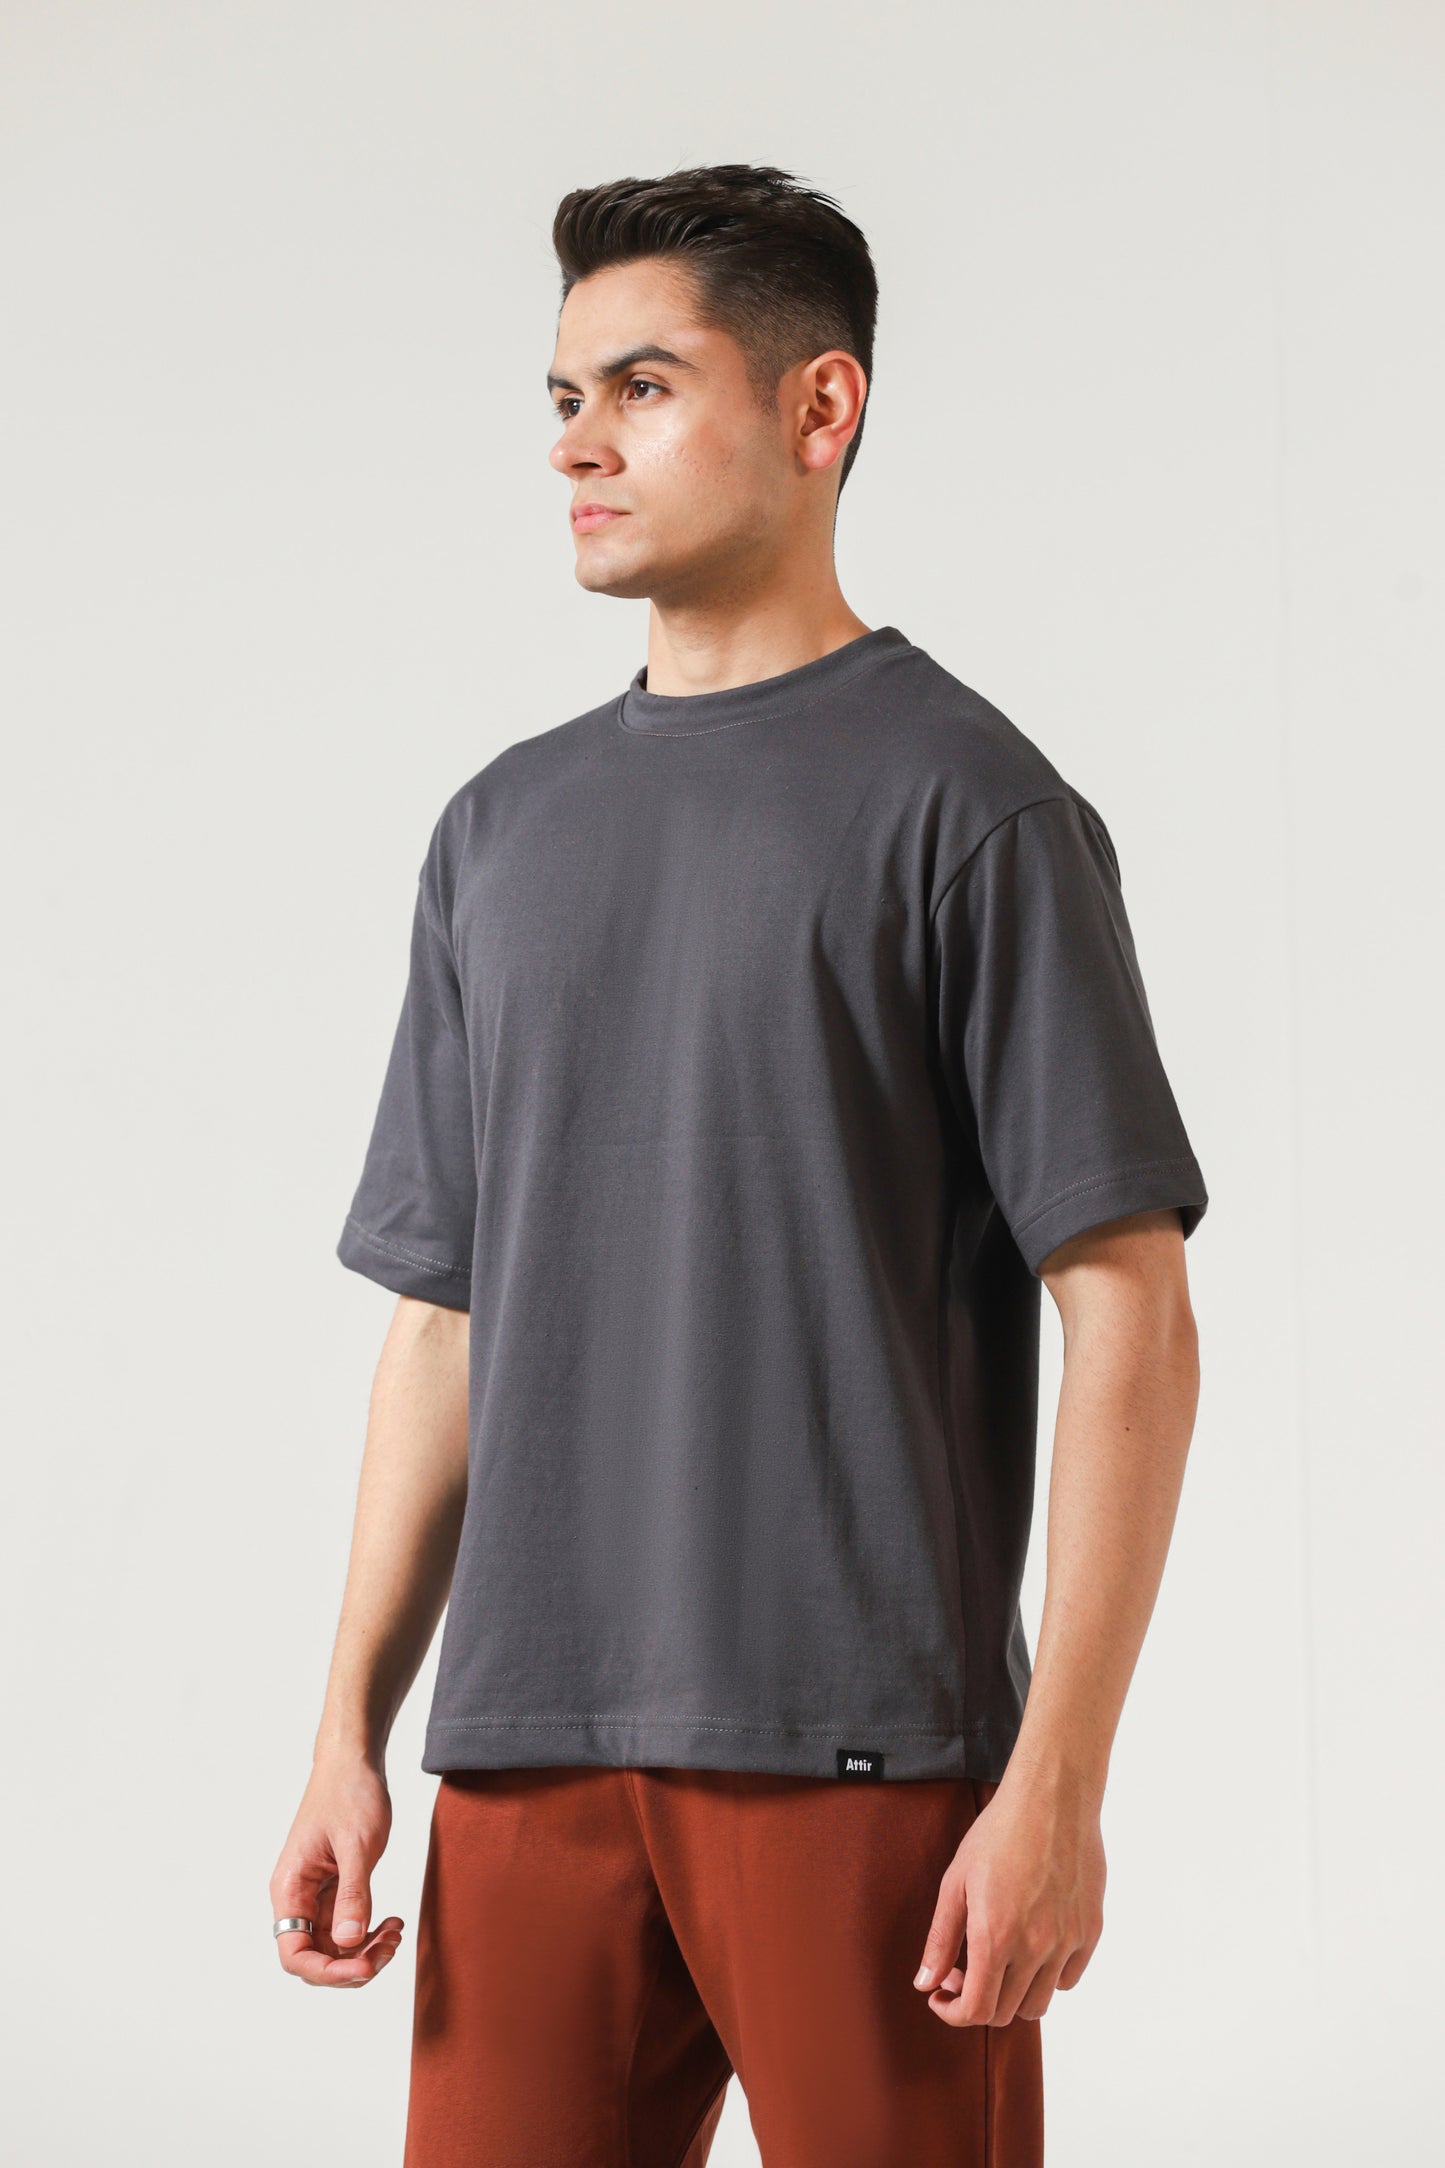 Oversized T-shirt in Grey